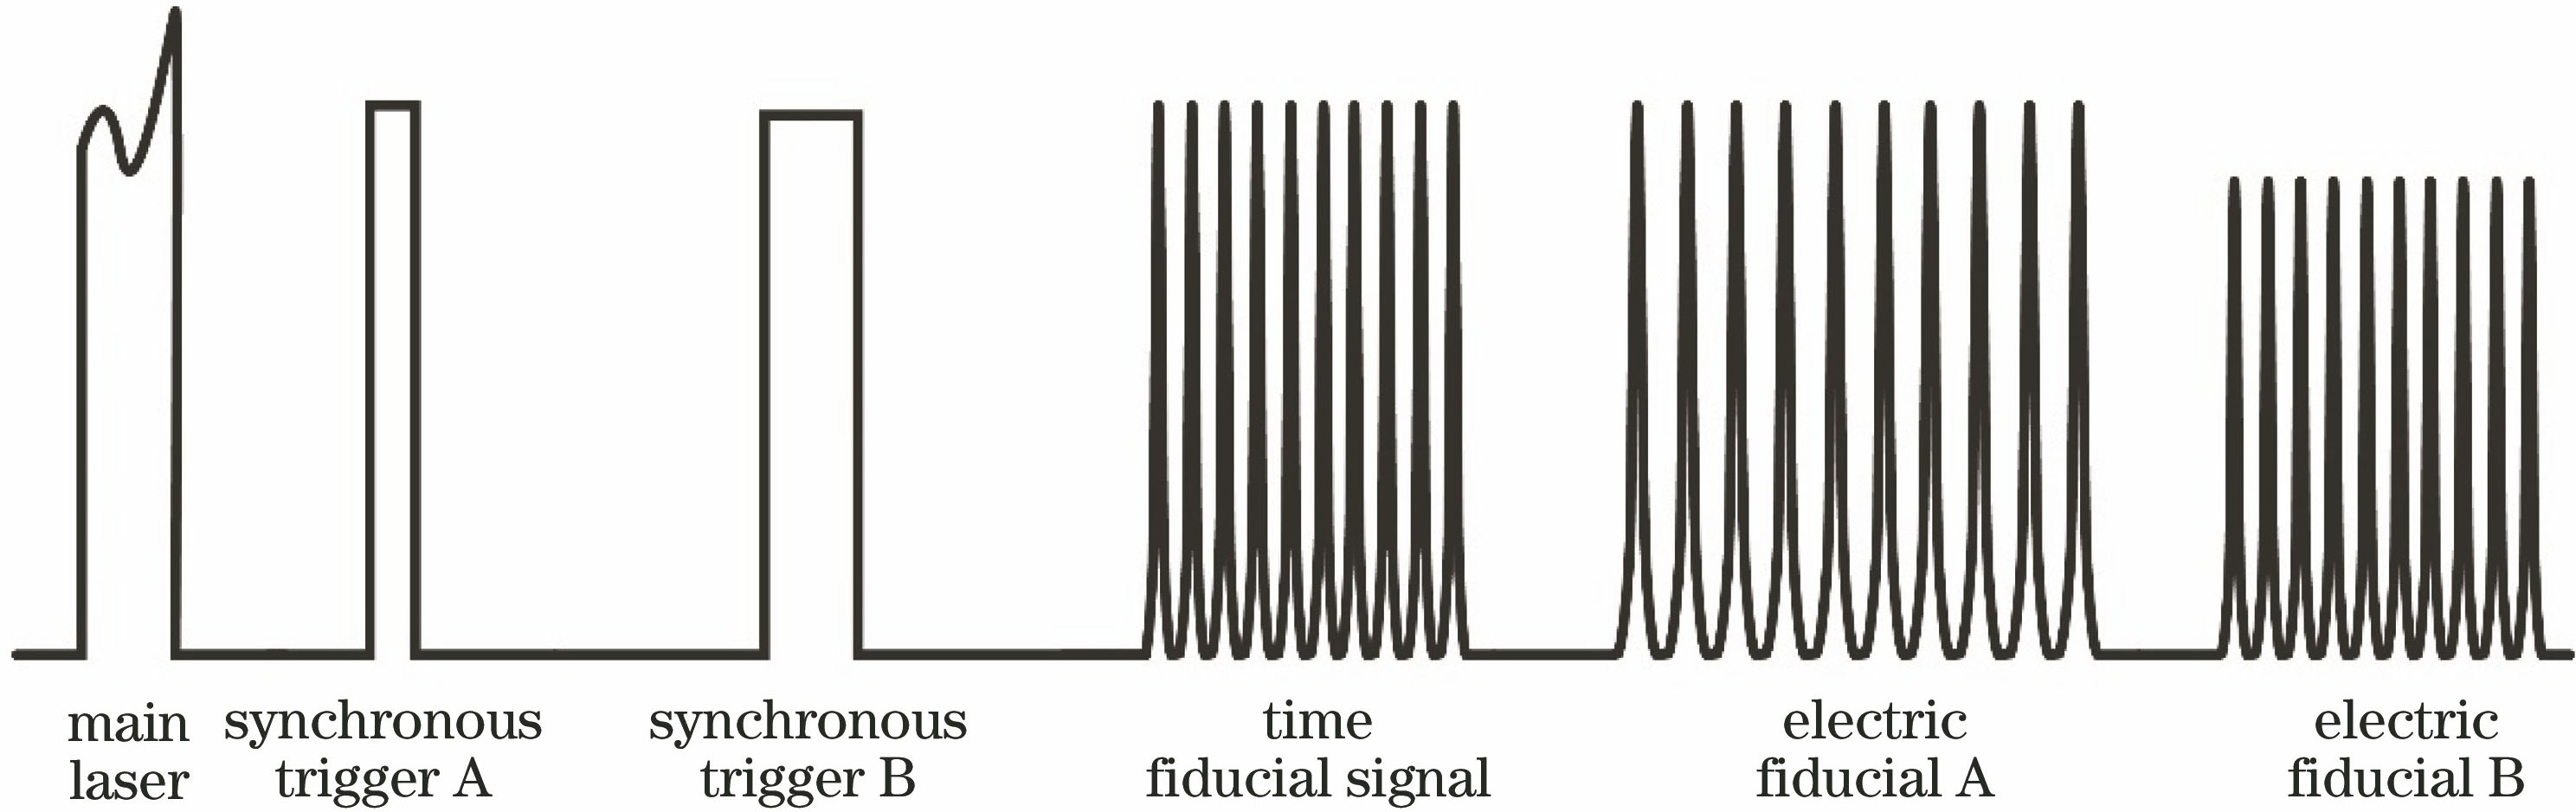 Time division multiplexing for time fiducial system and main laser